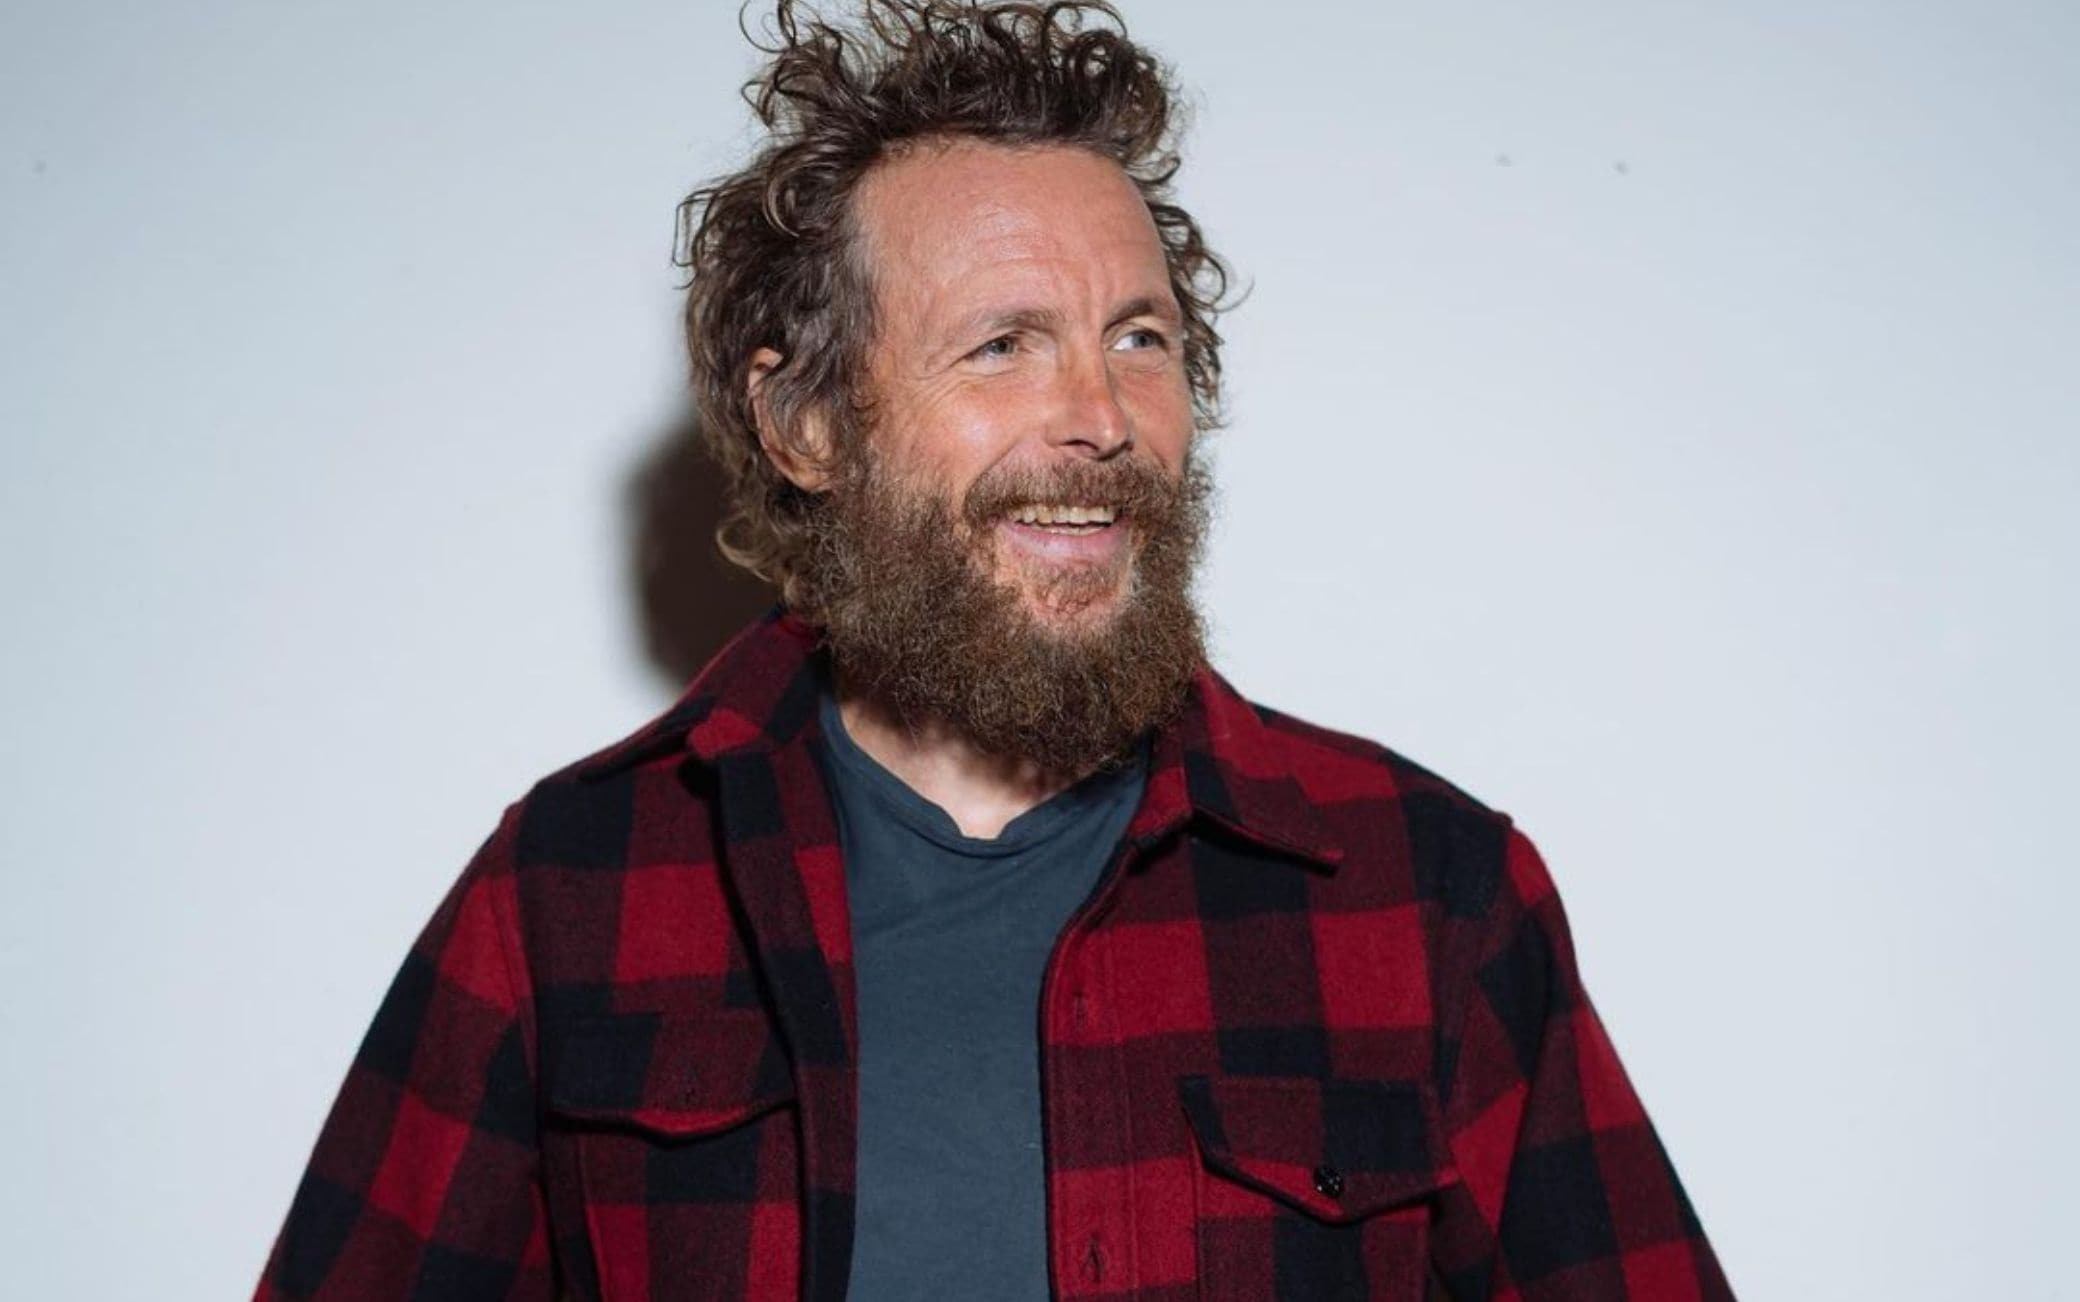 Jovanotti in concert: two exclusive dates in Rome and Milan